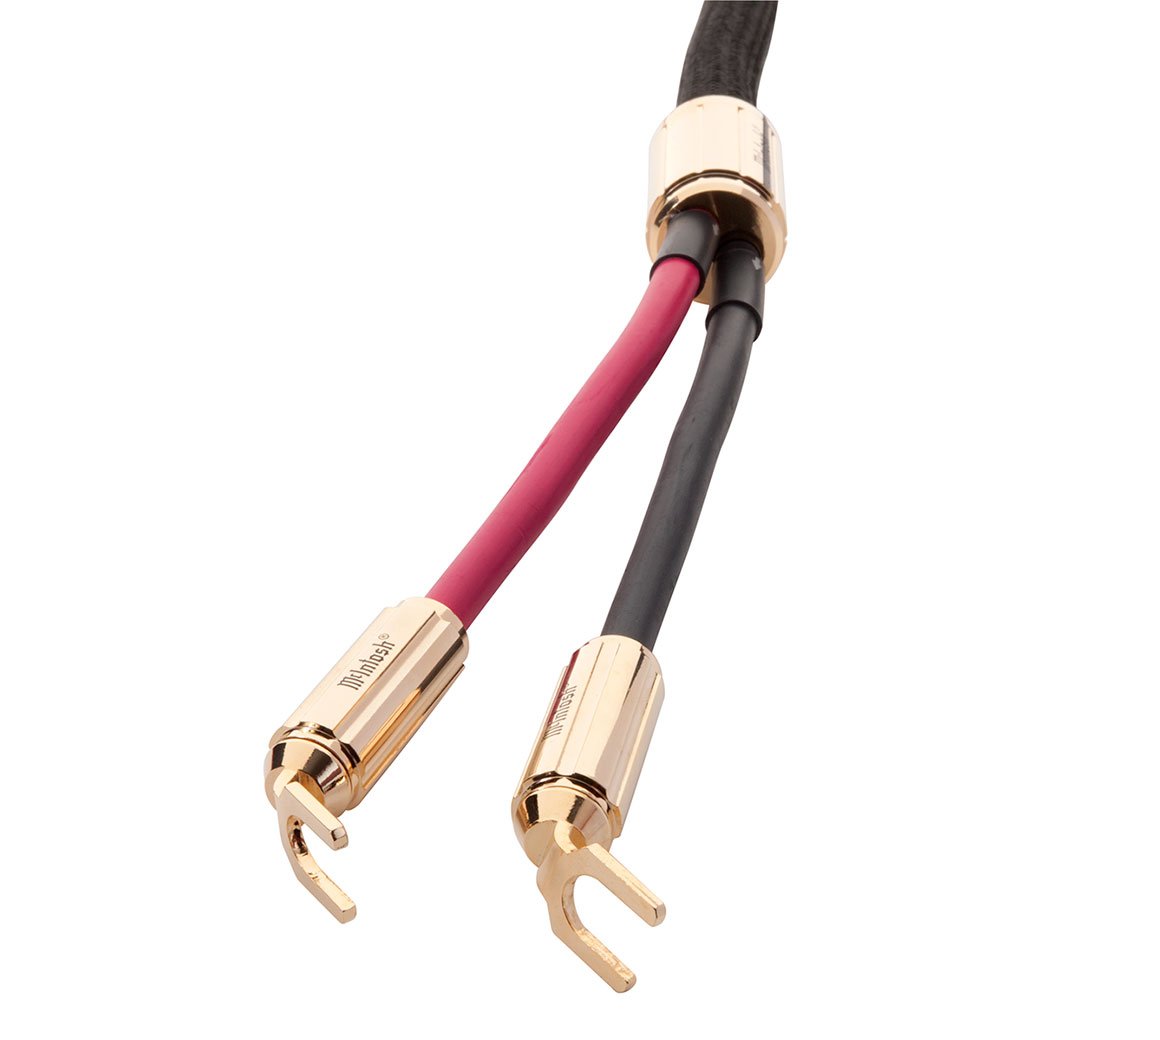 McIntosh Speaker Cables- Sold as a Pair (In-Store Purchases Only & USD Pricing)